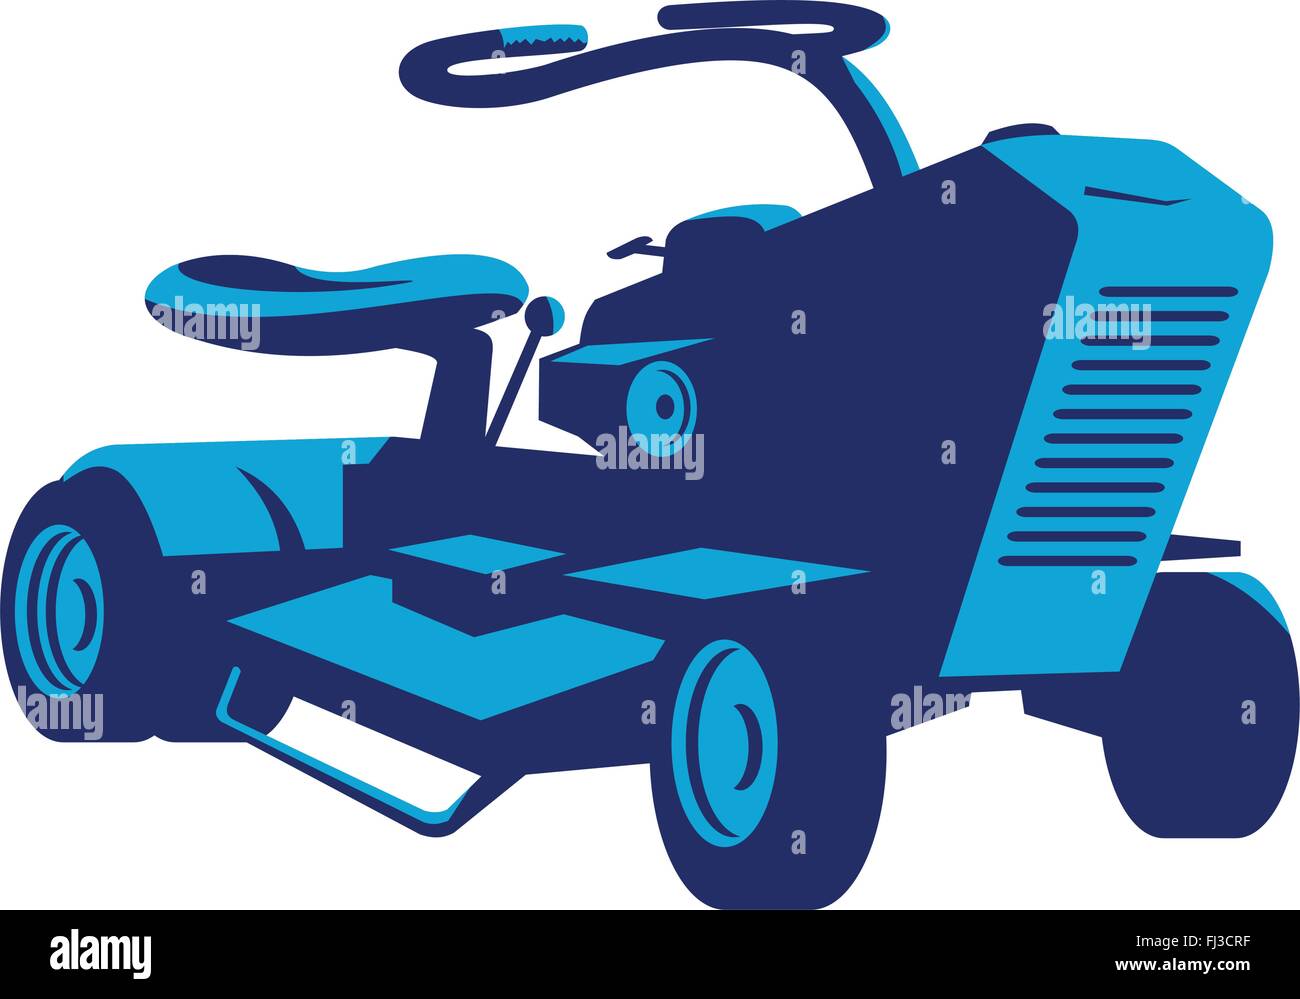 vector illustration of a vintage ride on lawn mower viewed from front on low angle done in retro style. Stock Vector